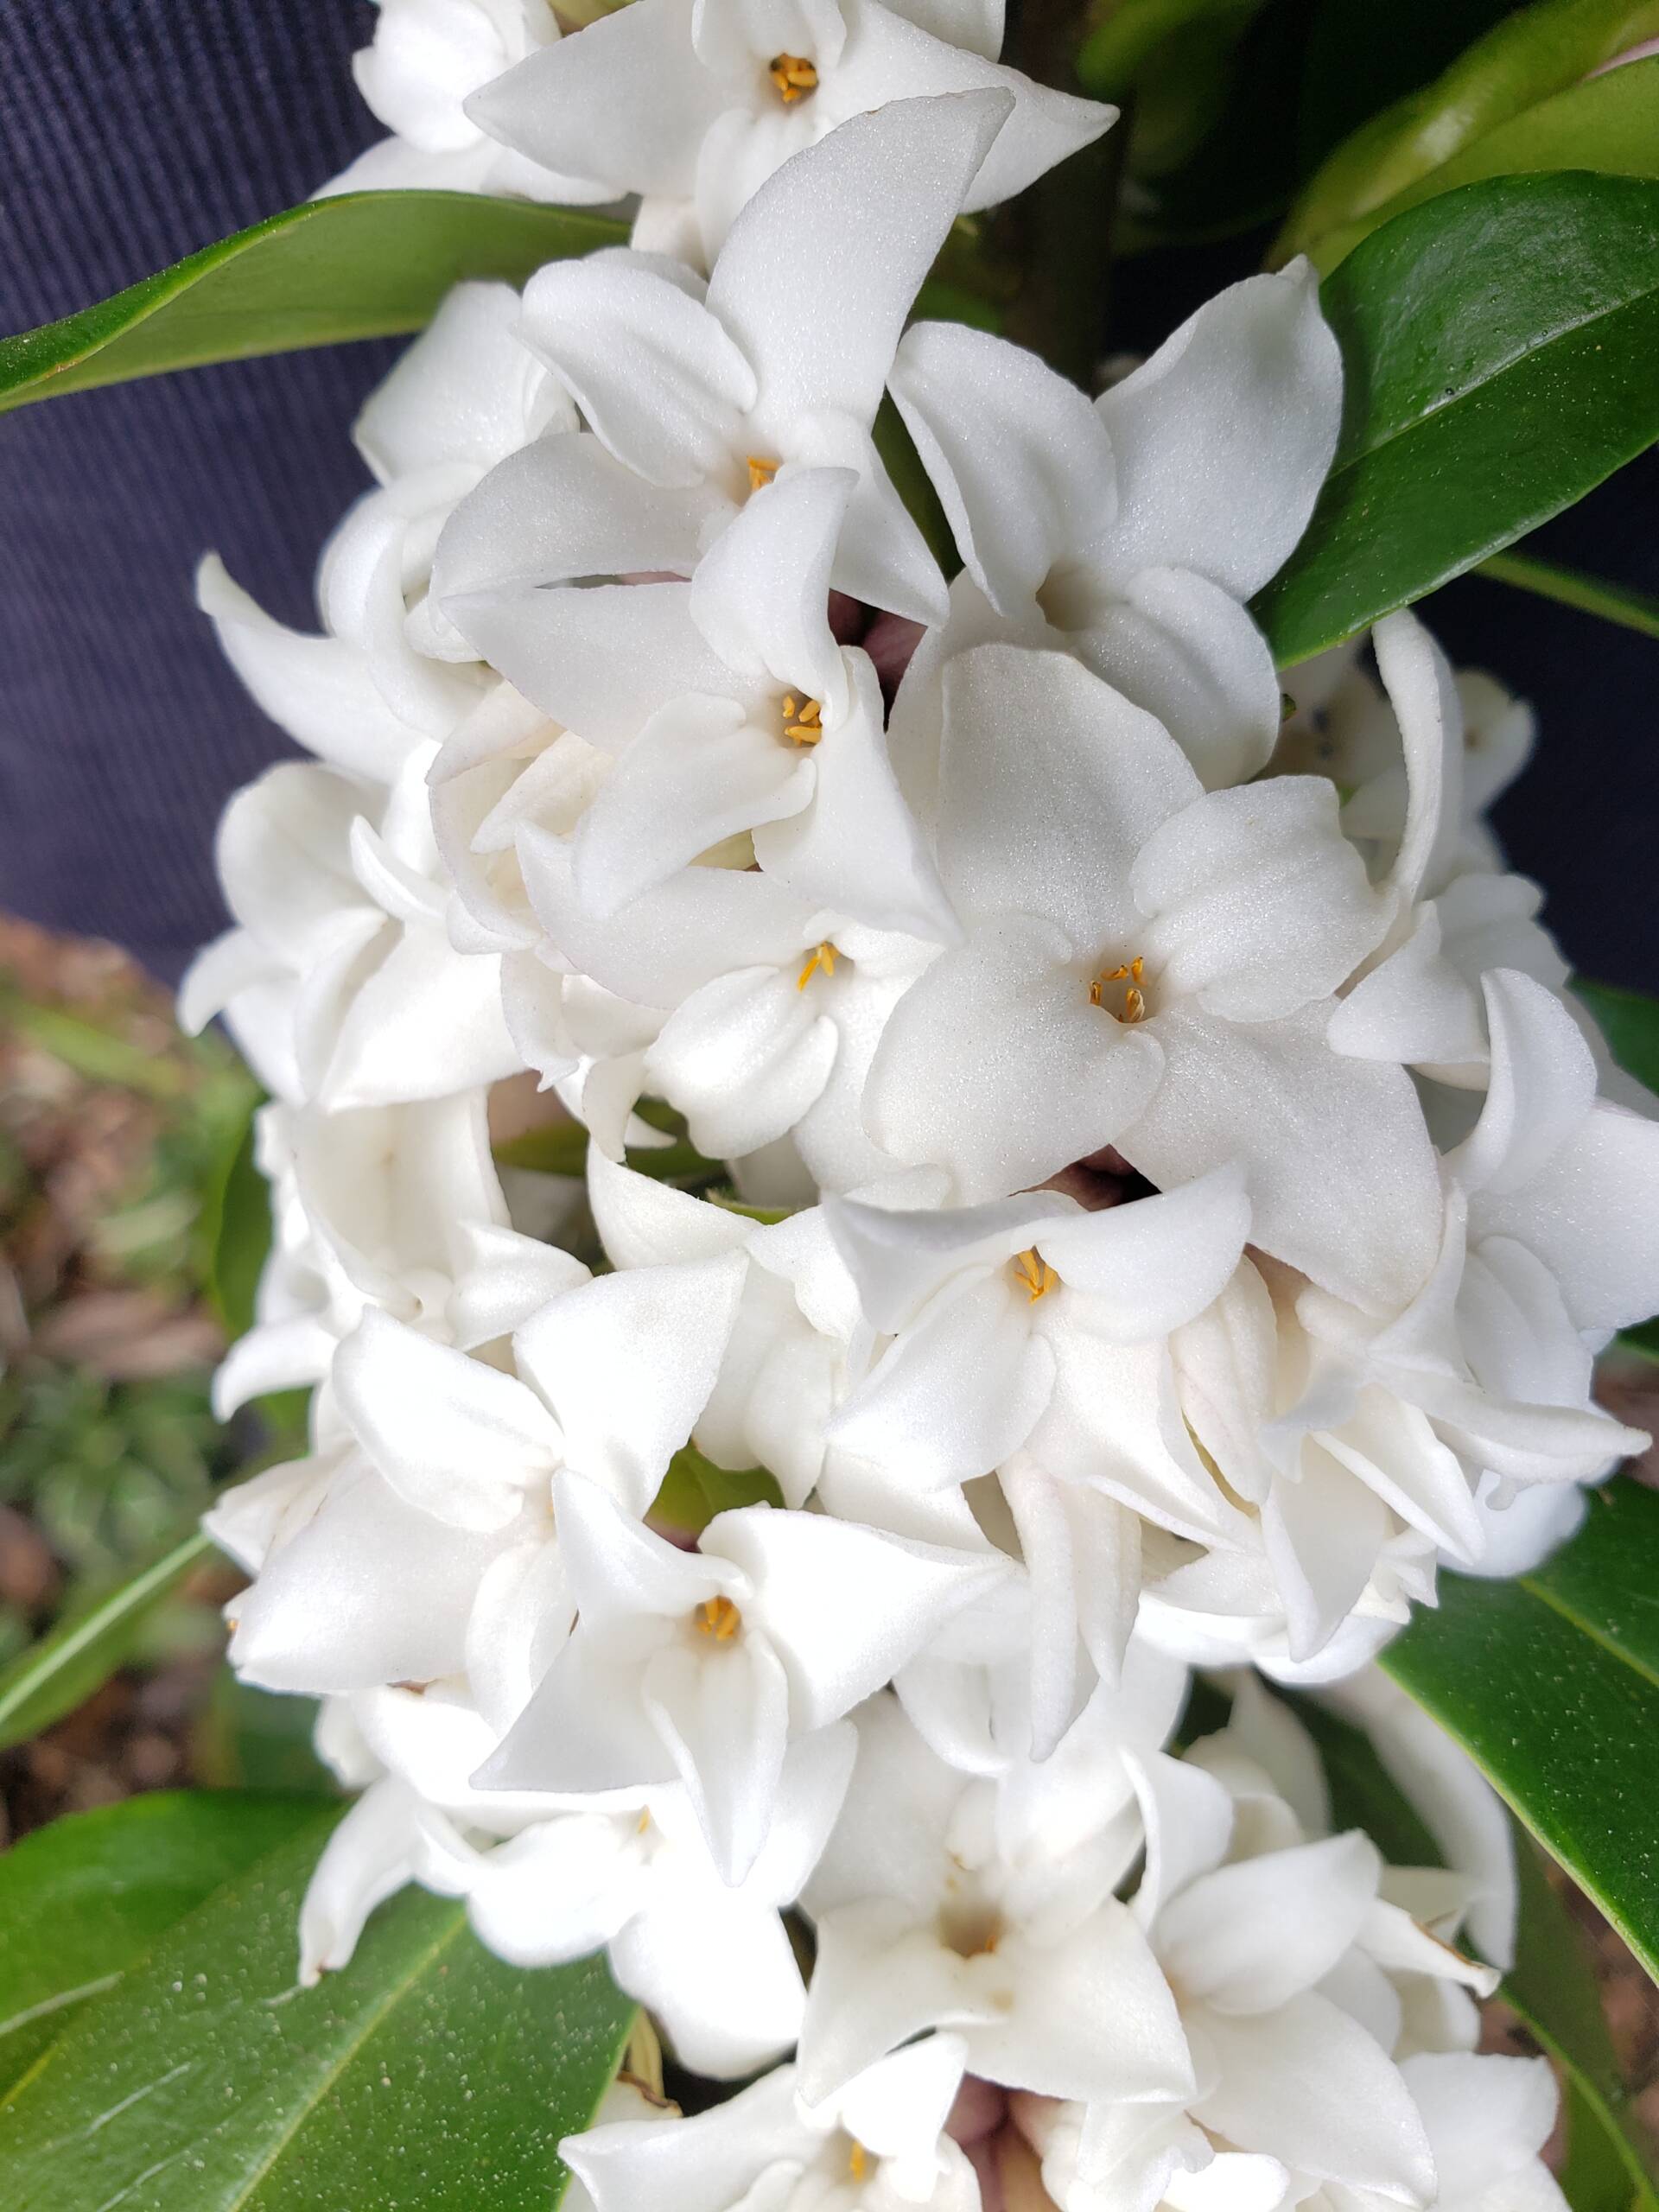 Since 2021, Daphne ‘Perfume Princess’ is also available in white.